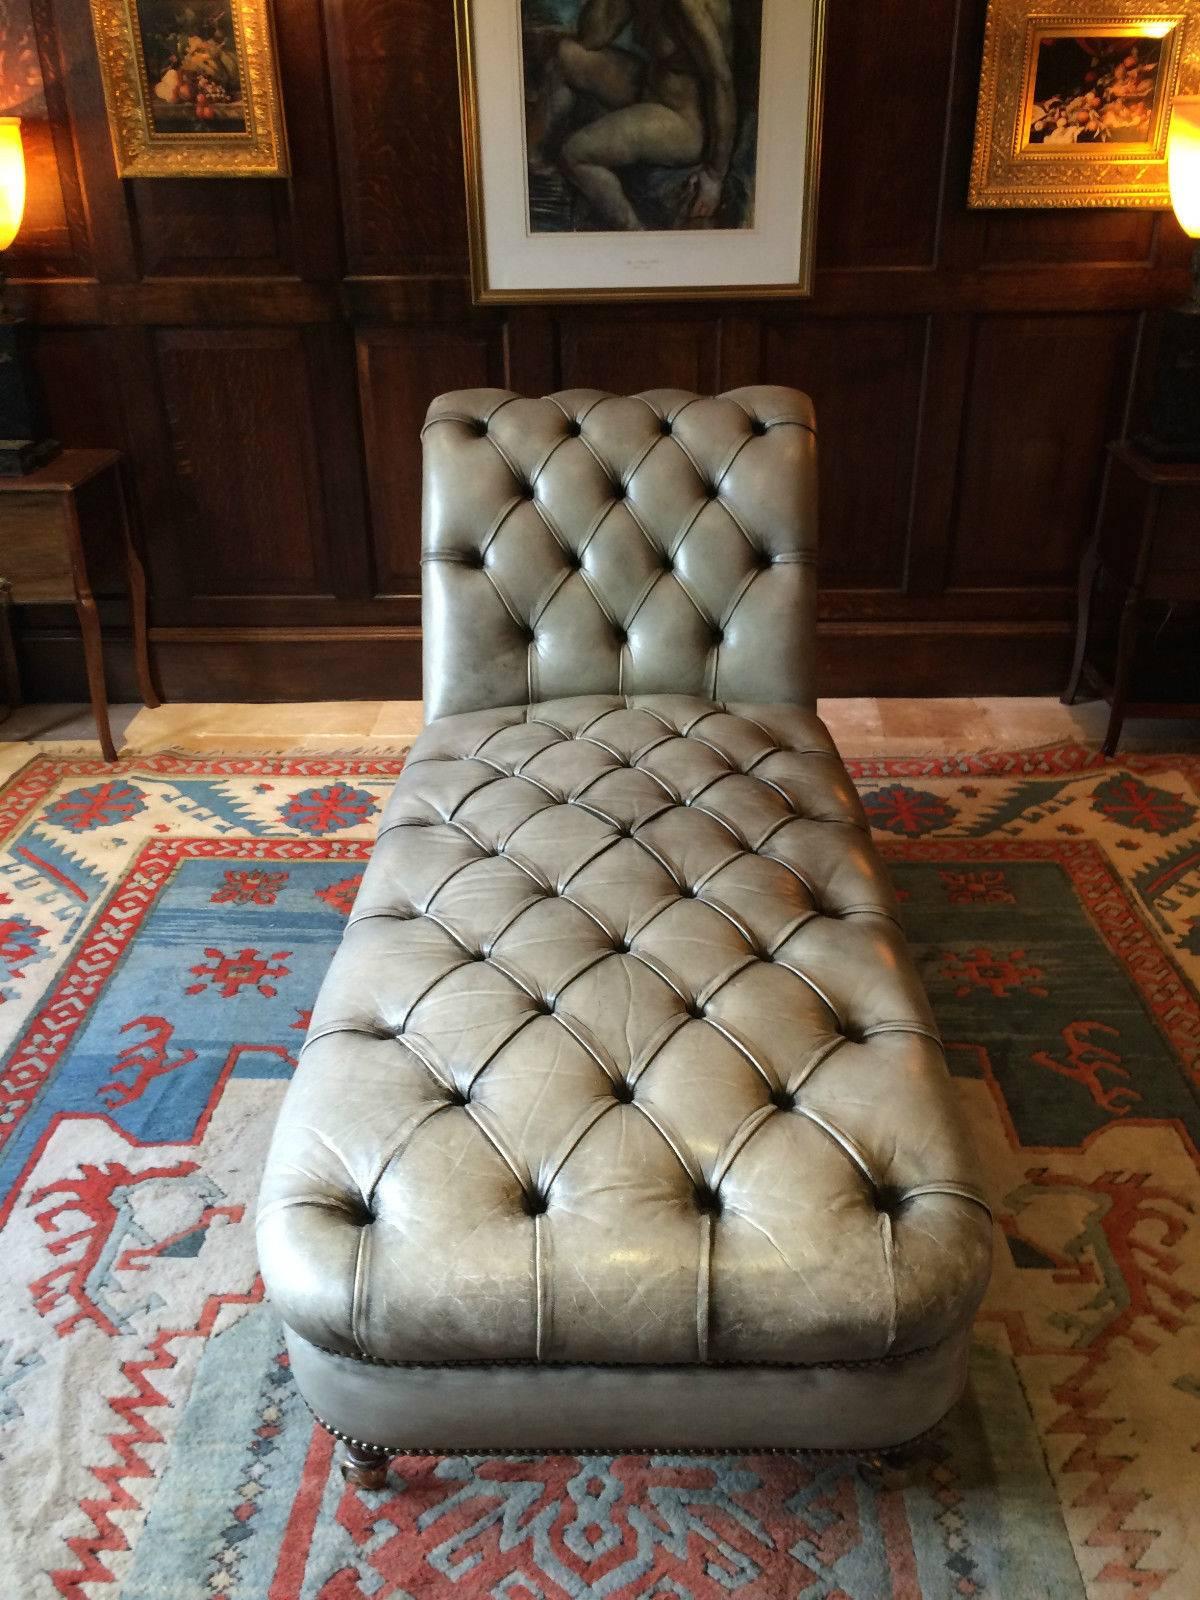 A leather club style Chesterfield button-back chaise longue couch with scrolling ends and standing on four turned legs terminating in brass casters, upholstered in grey or very light green leather.